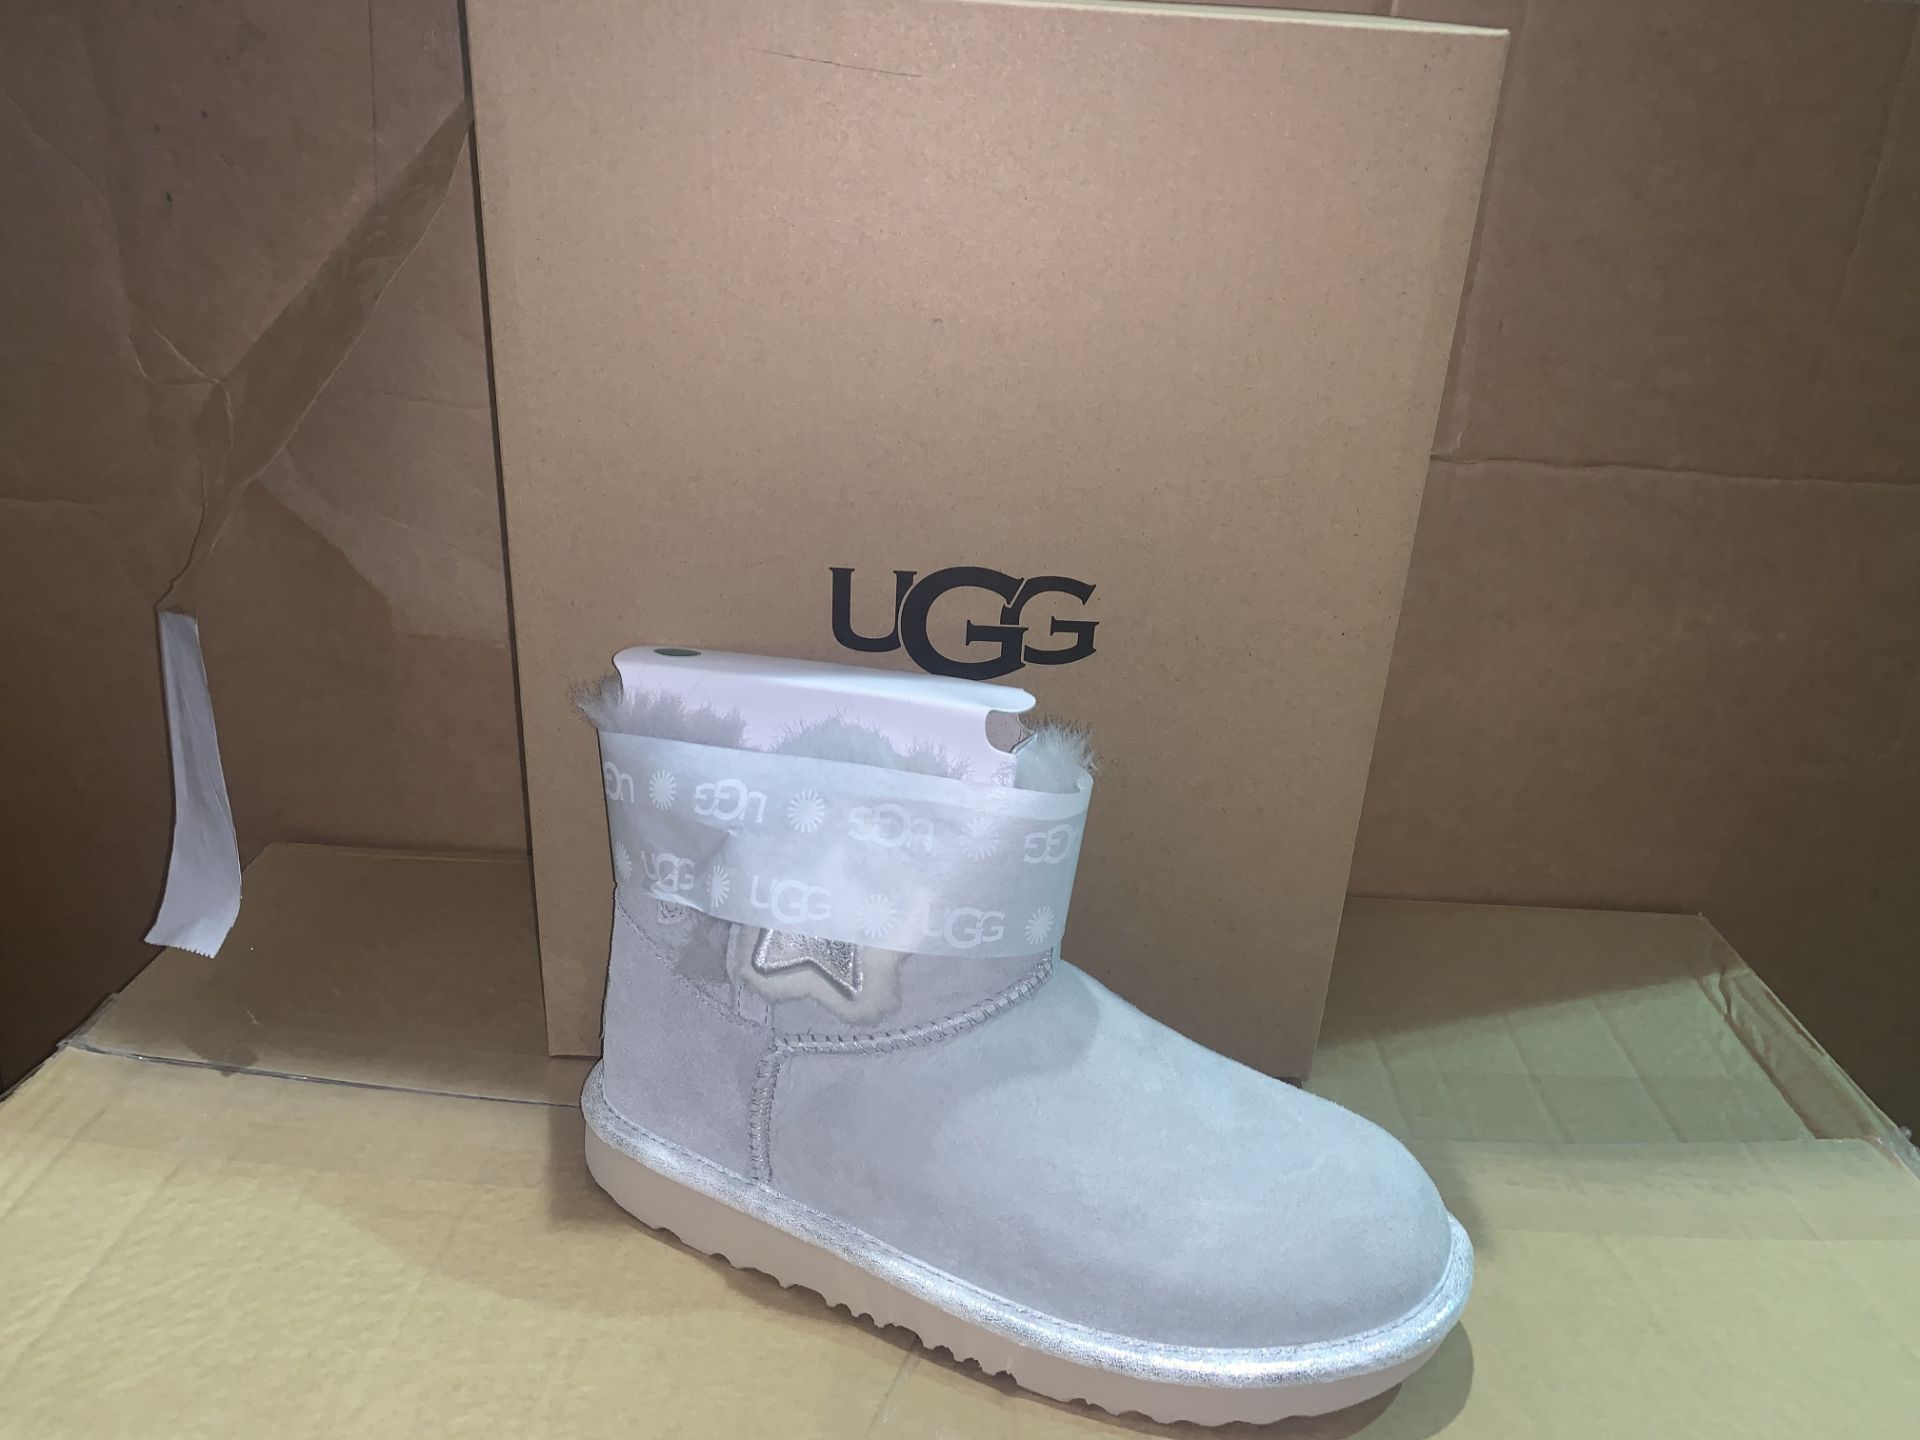 (NO VAT) 2 x NEW BOXED PAIRS OF UGG MINI BAILEY BUTTON BOOTS. SIZE UK 3